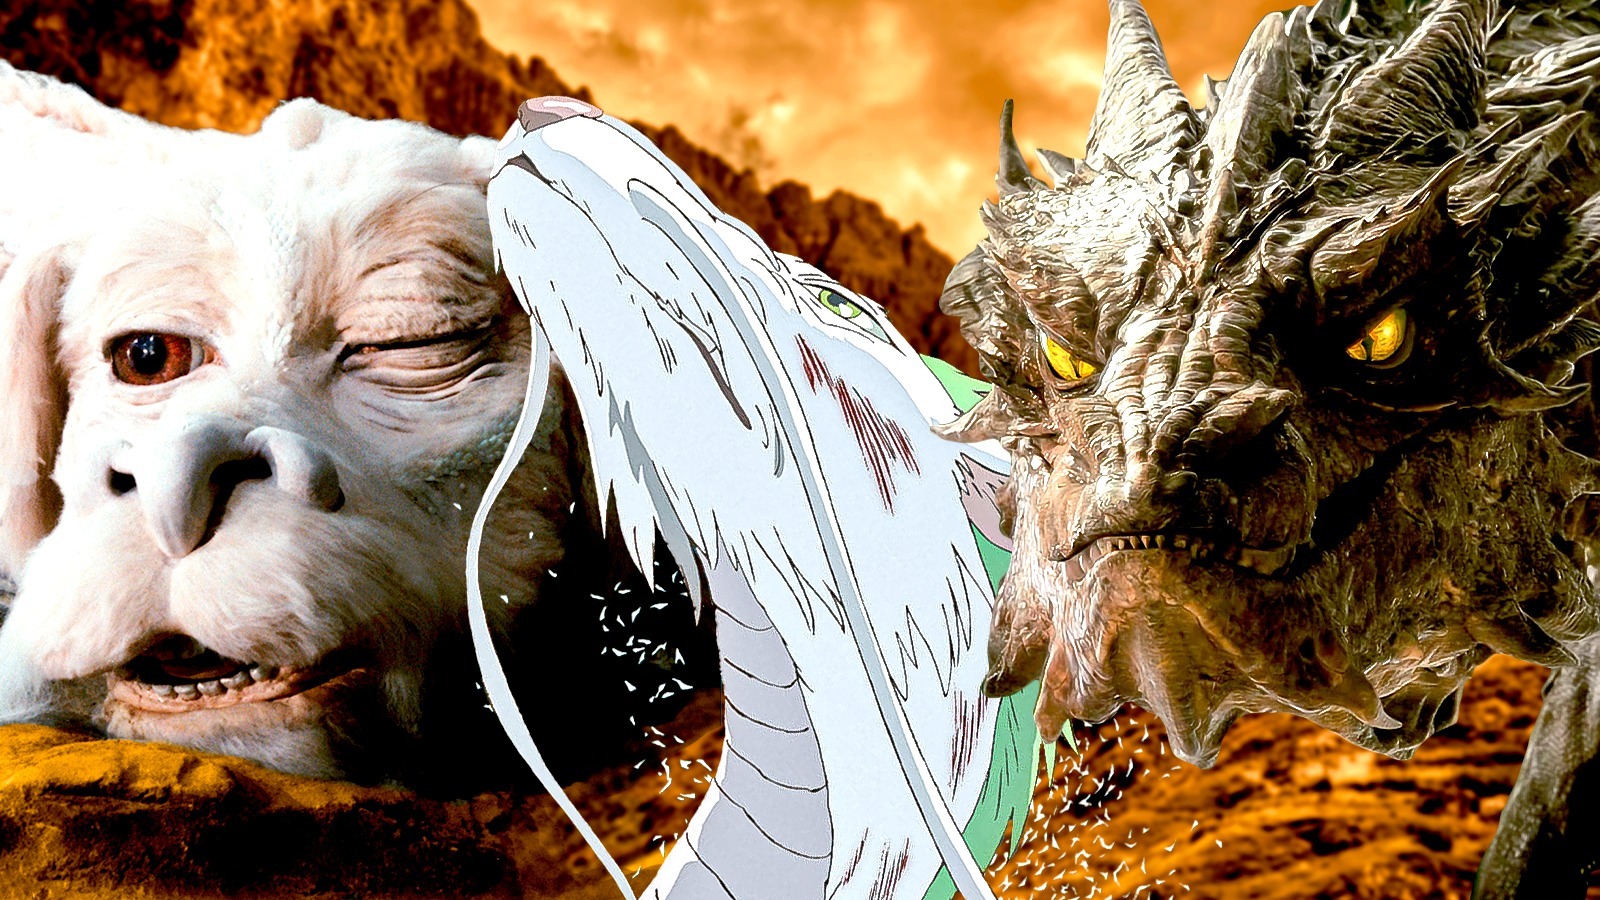 Biggest Dragons of all time - Gaming  Big dragon, Dragons of middle earth,  The hobbit